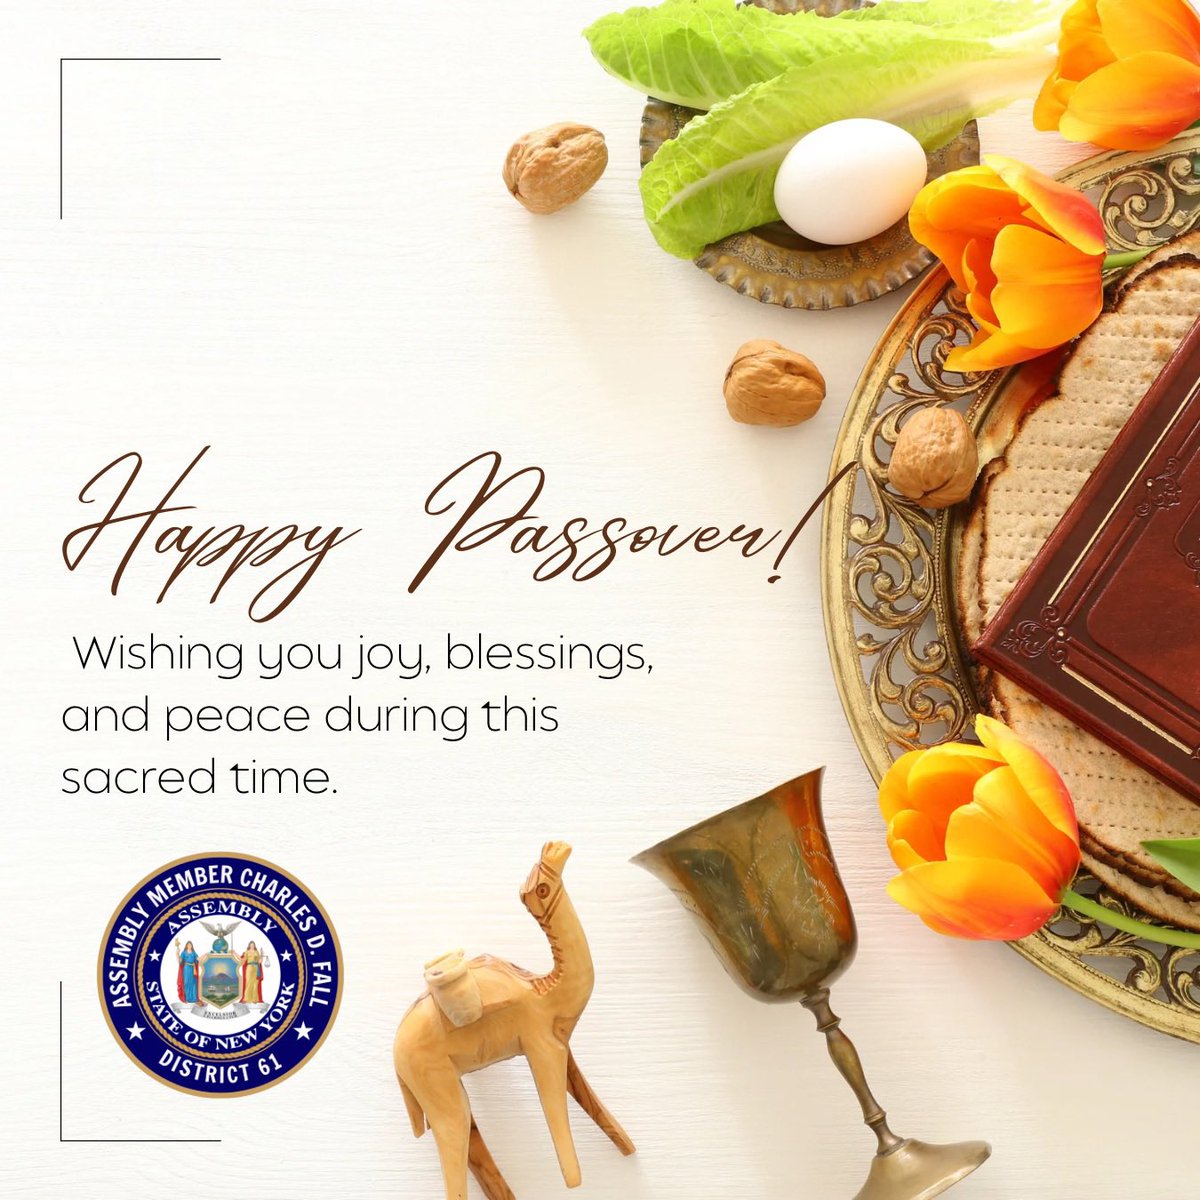 Extending warm wishes for peace, joy, and renewal to all observing Passover. May your Seder be filled with meaningful stories and cherished moments. Chag Pesach Sameach! #District61